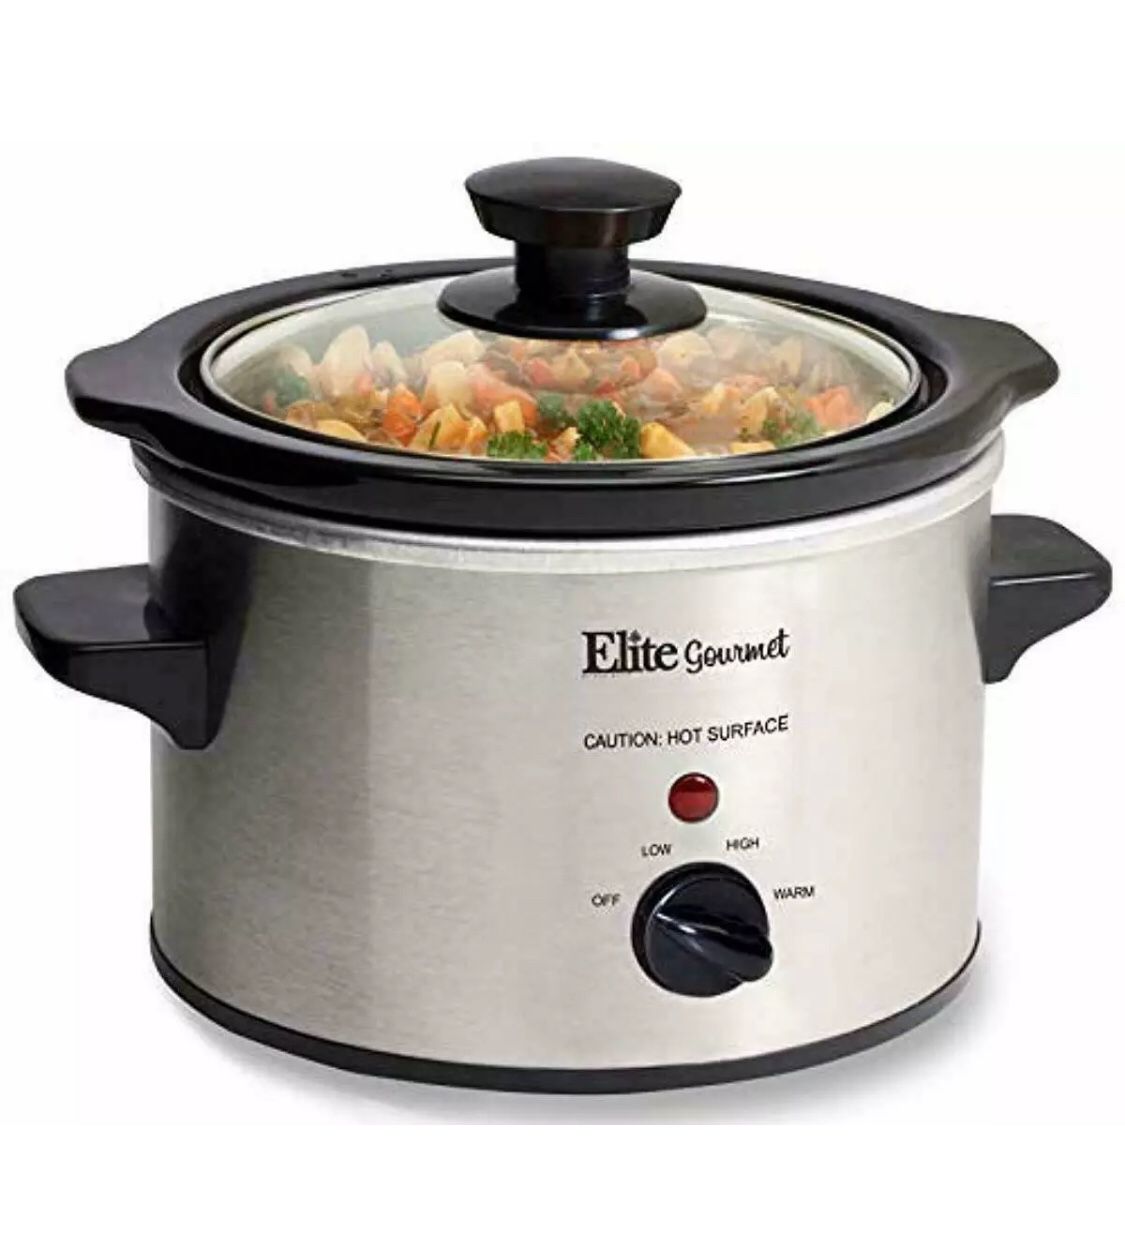 Electric Slow Cooker Small Crock Pot Mini Stainless Steel Cooking 1.5 Quart QT